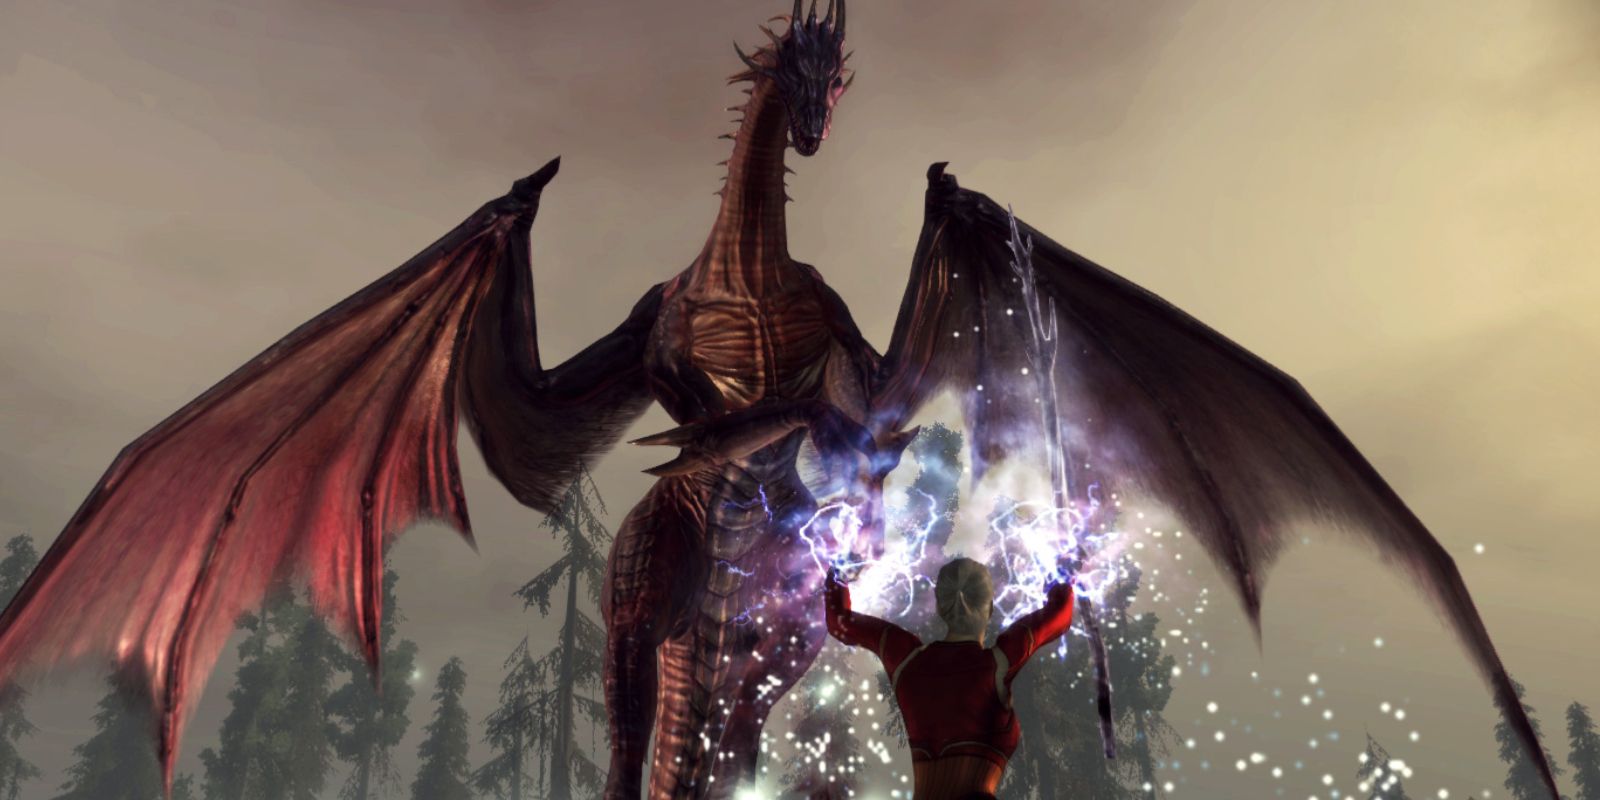 A character in the original Dragon Age holding their arms up and casting a spell at an approaching dragon